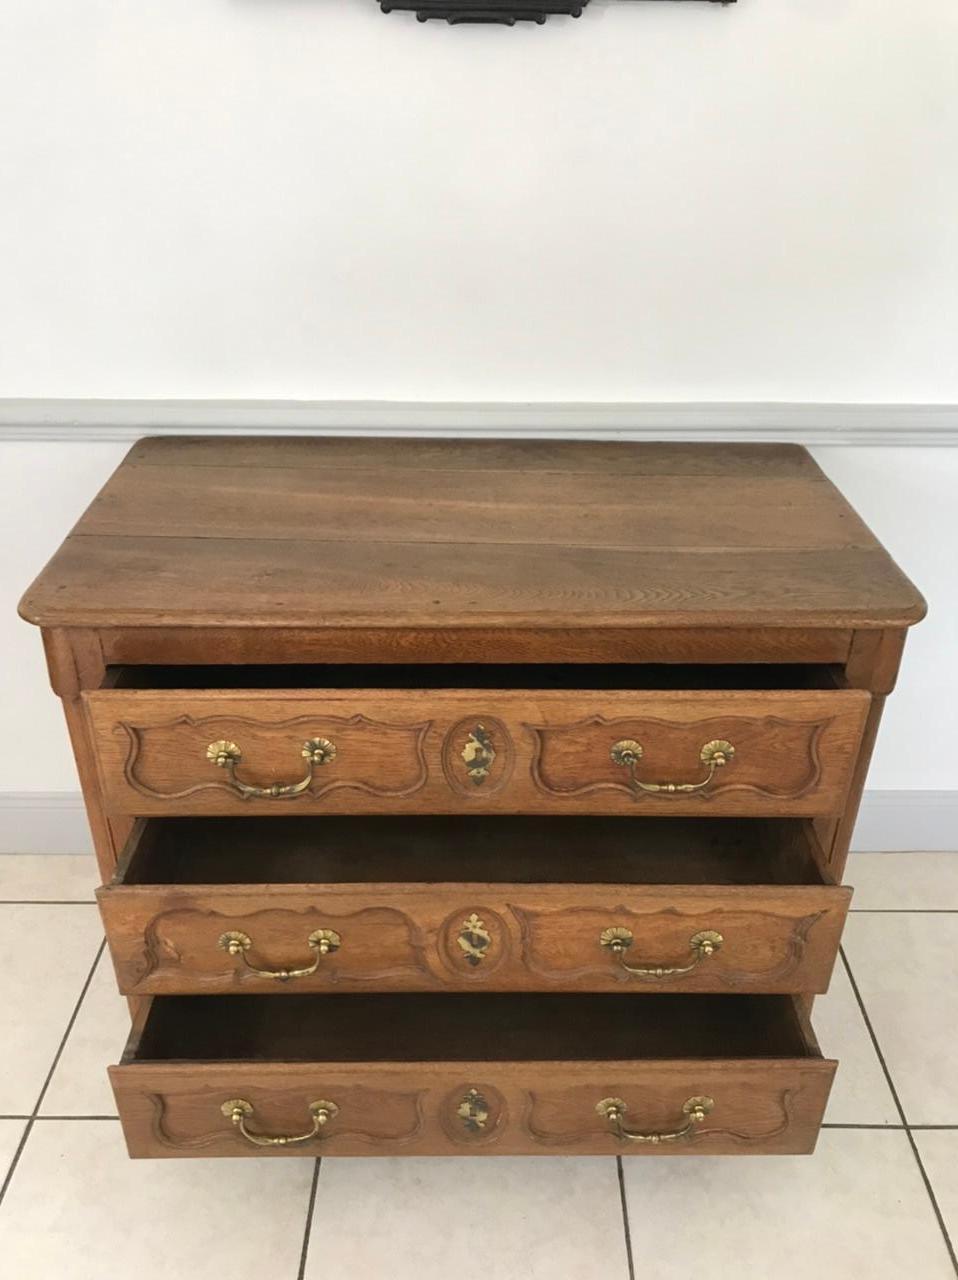 Beautiful Louis XV straight oak chest of drawers from the mid-18th century. The keyholes as well as the handles are made of brass.
The feet are arched.
The wood is molded with decoration of reserves and medallions opening with three drawers in three